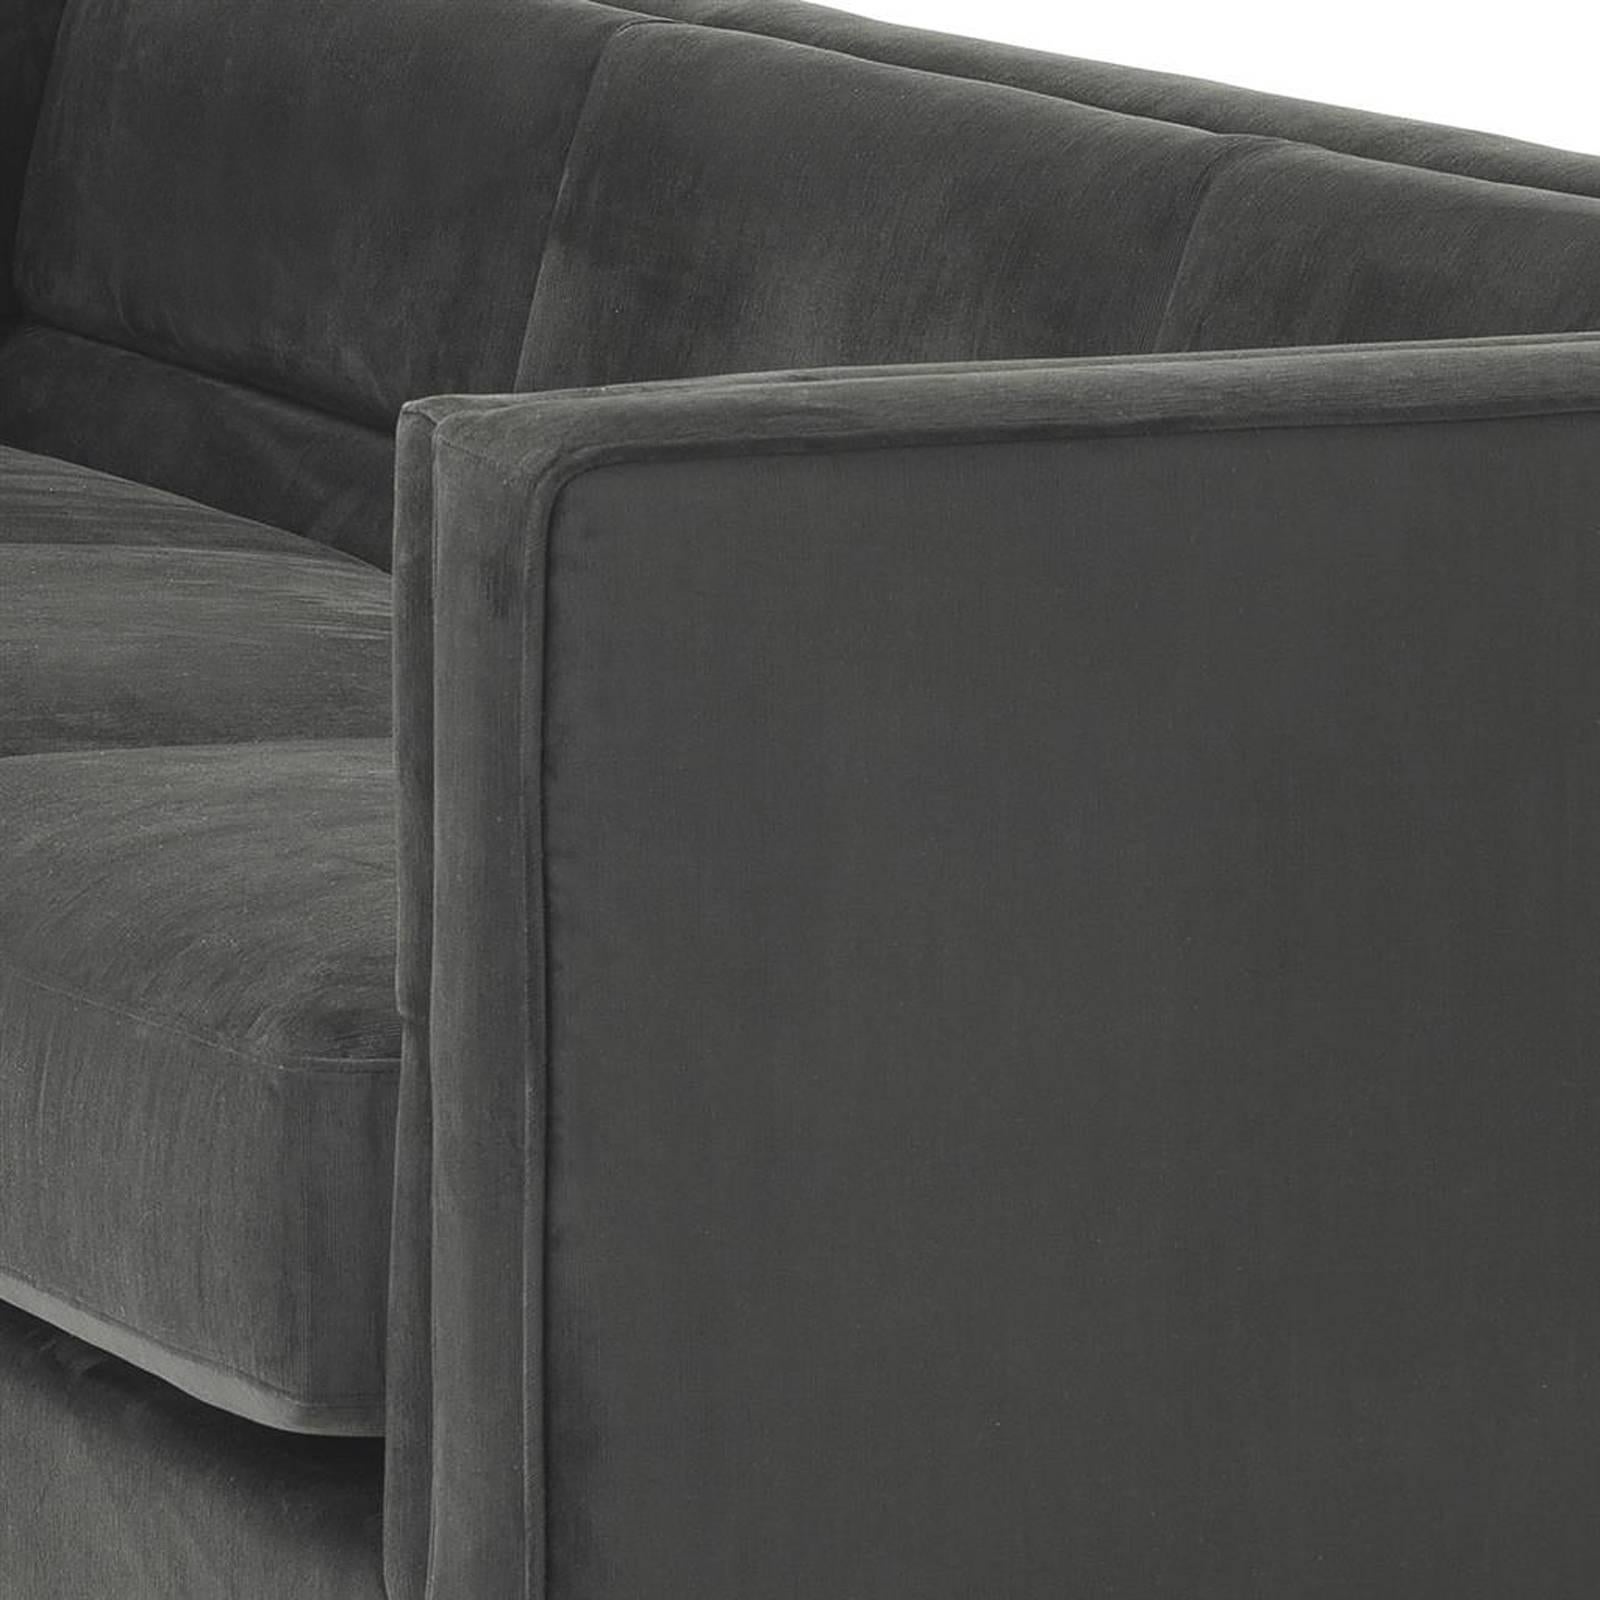 Hand-Crafted Becker Sofa with Anthracite Grey Fabric